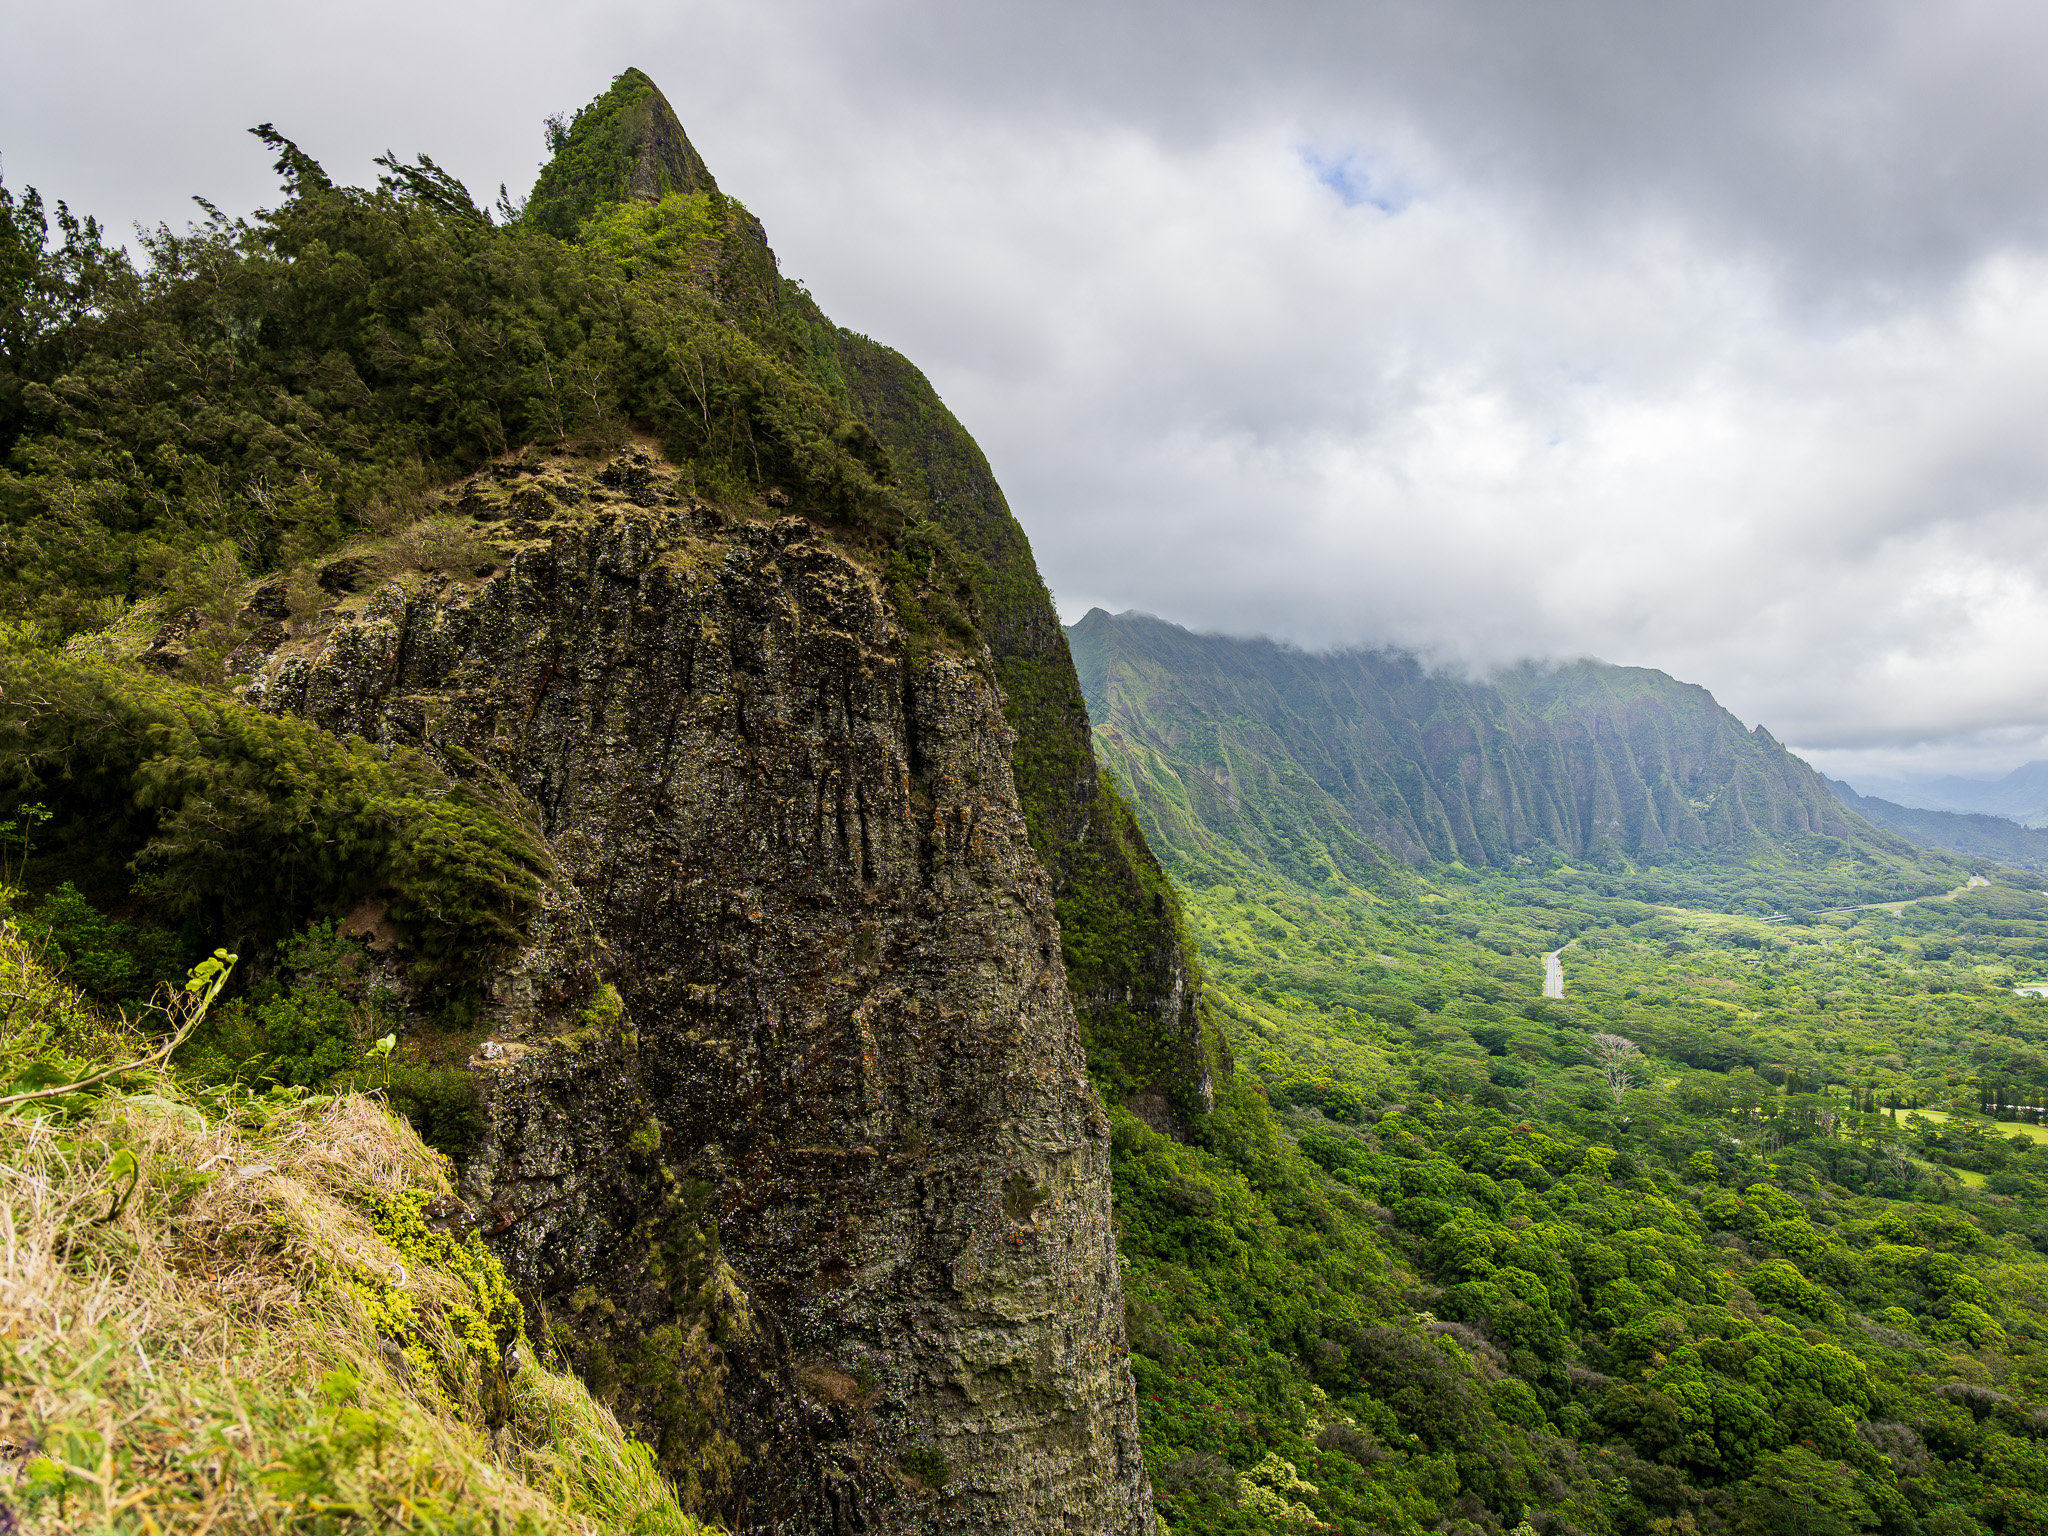 View from Nu'uanu Pali Lookout on a cloudy, rainy, windy afternoon in September